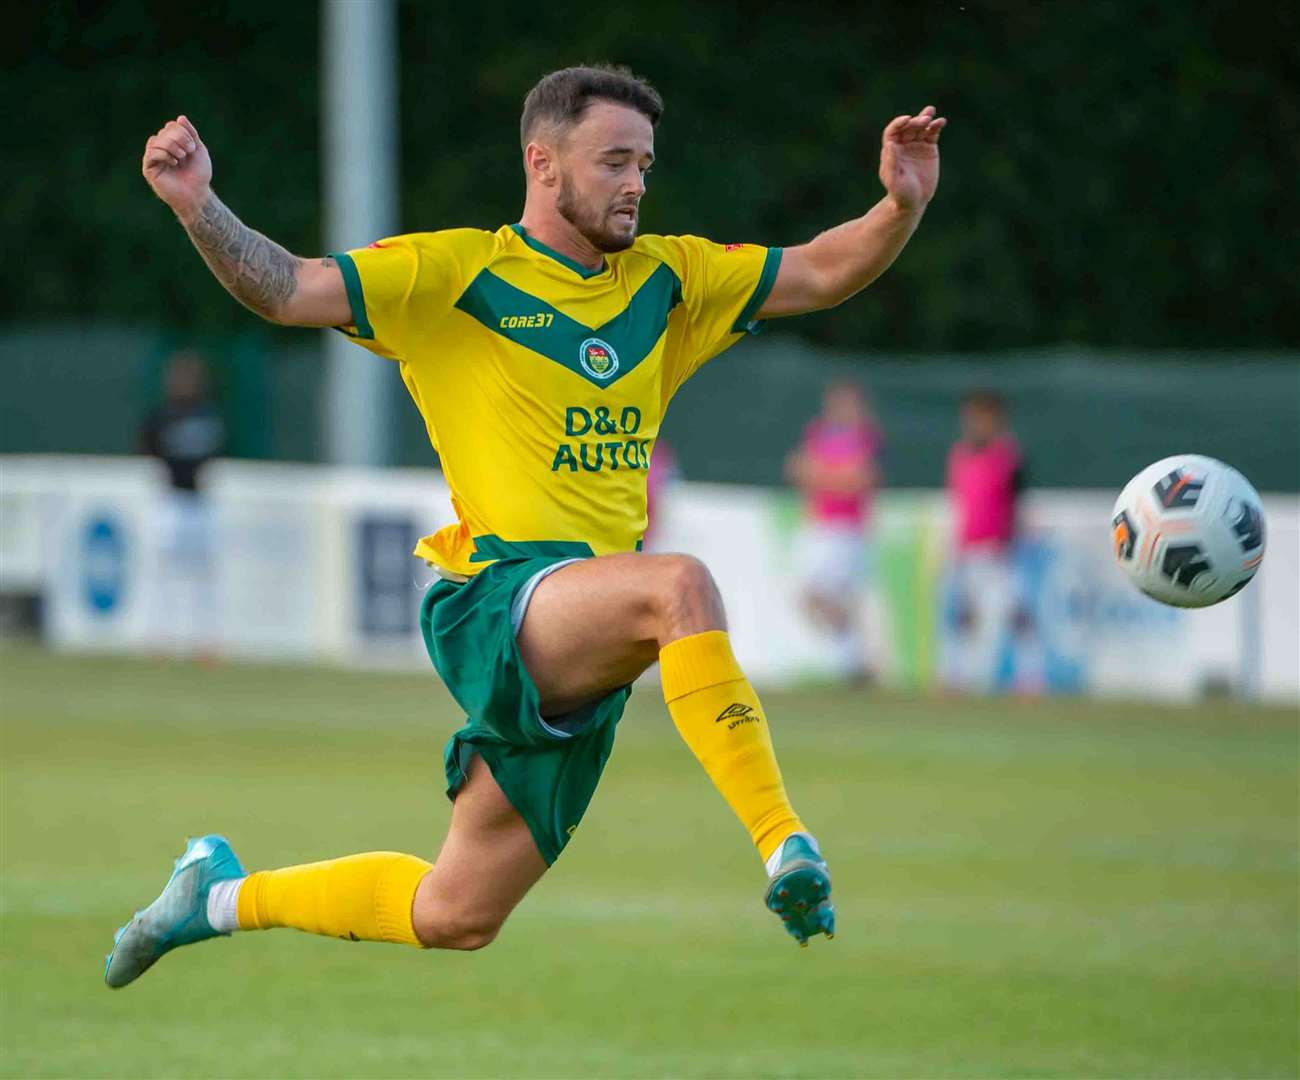 Danny Parish in action during Ashford’s 3-1 friendly win at Snodland on Tuesday. Picture: Ian Scammell